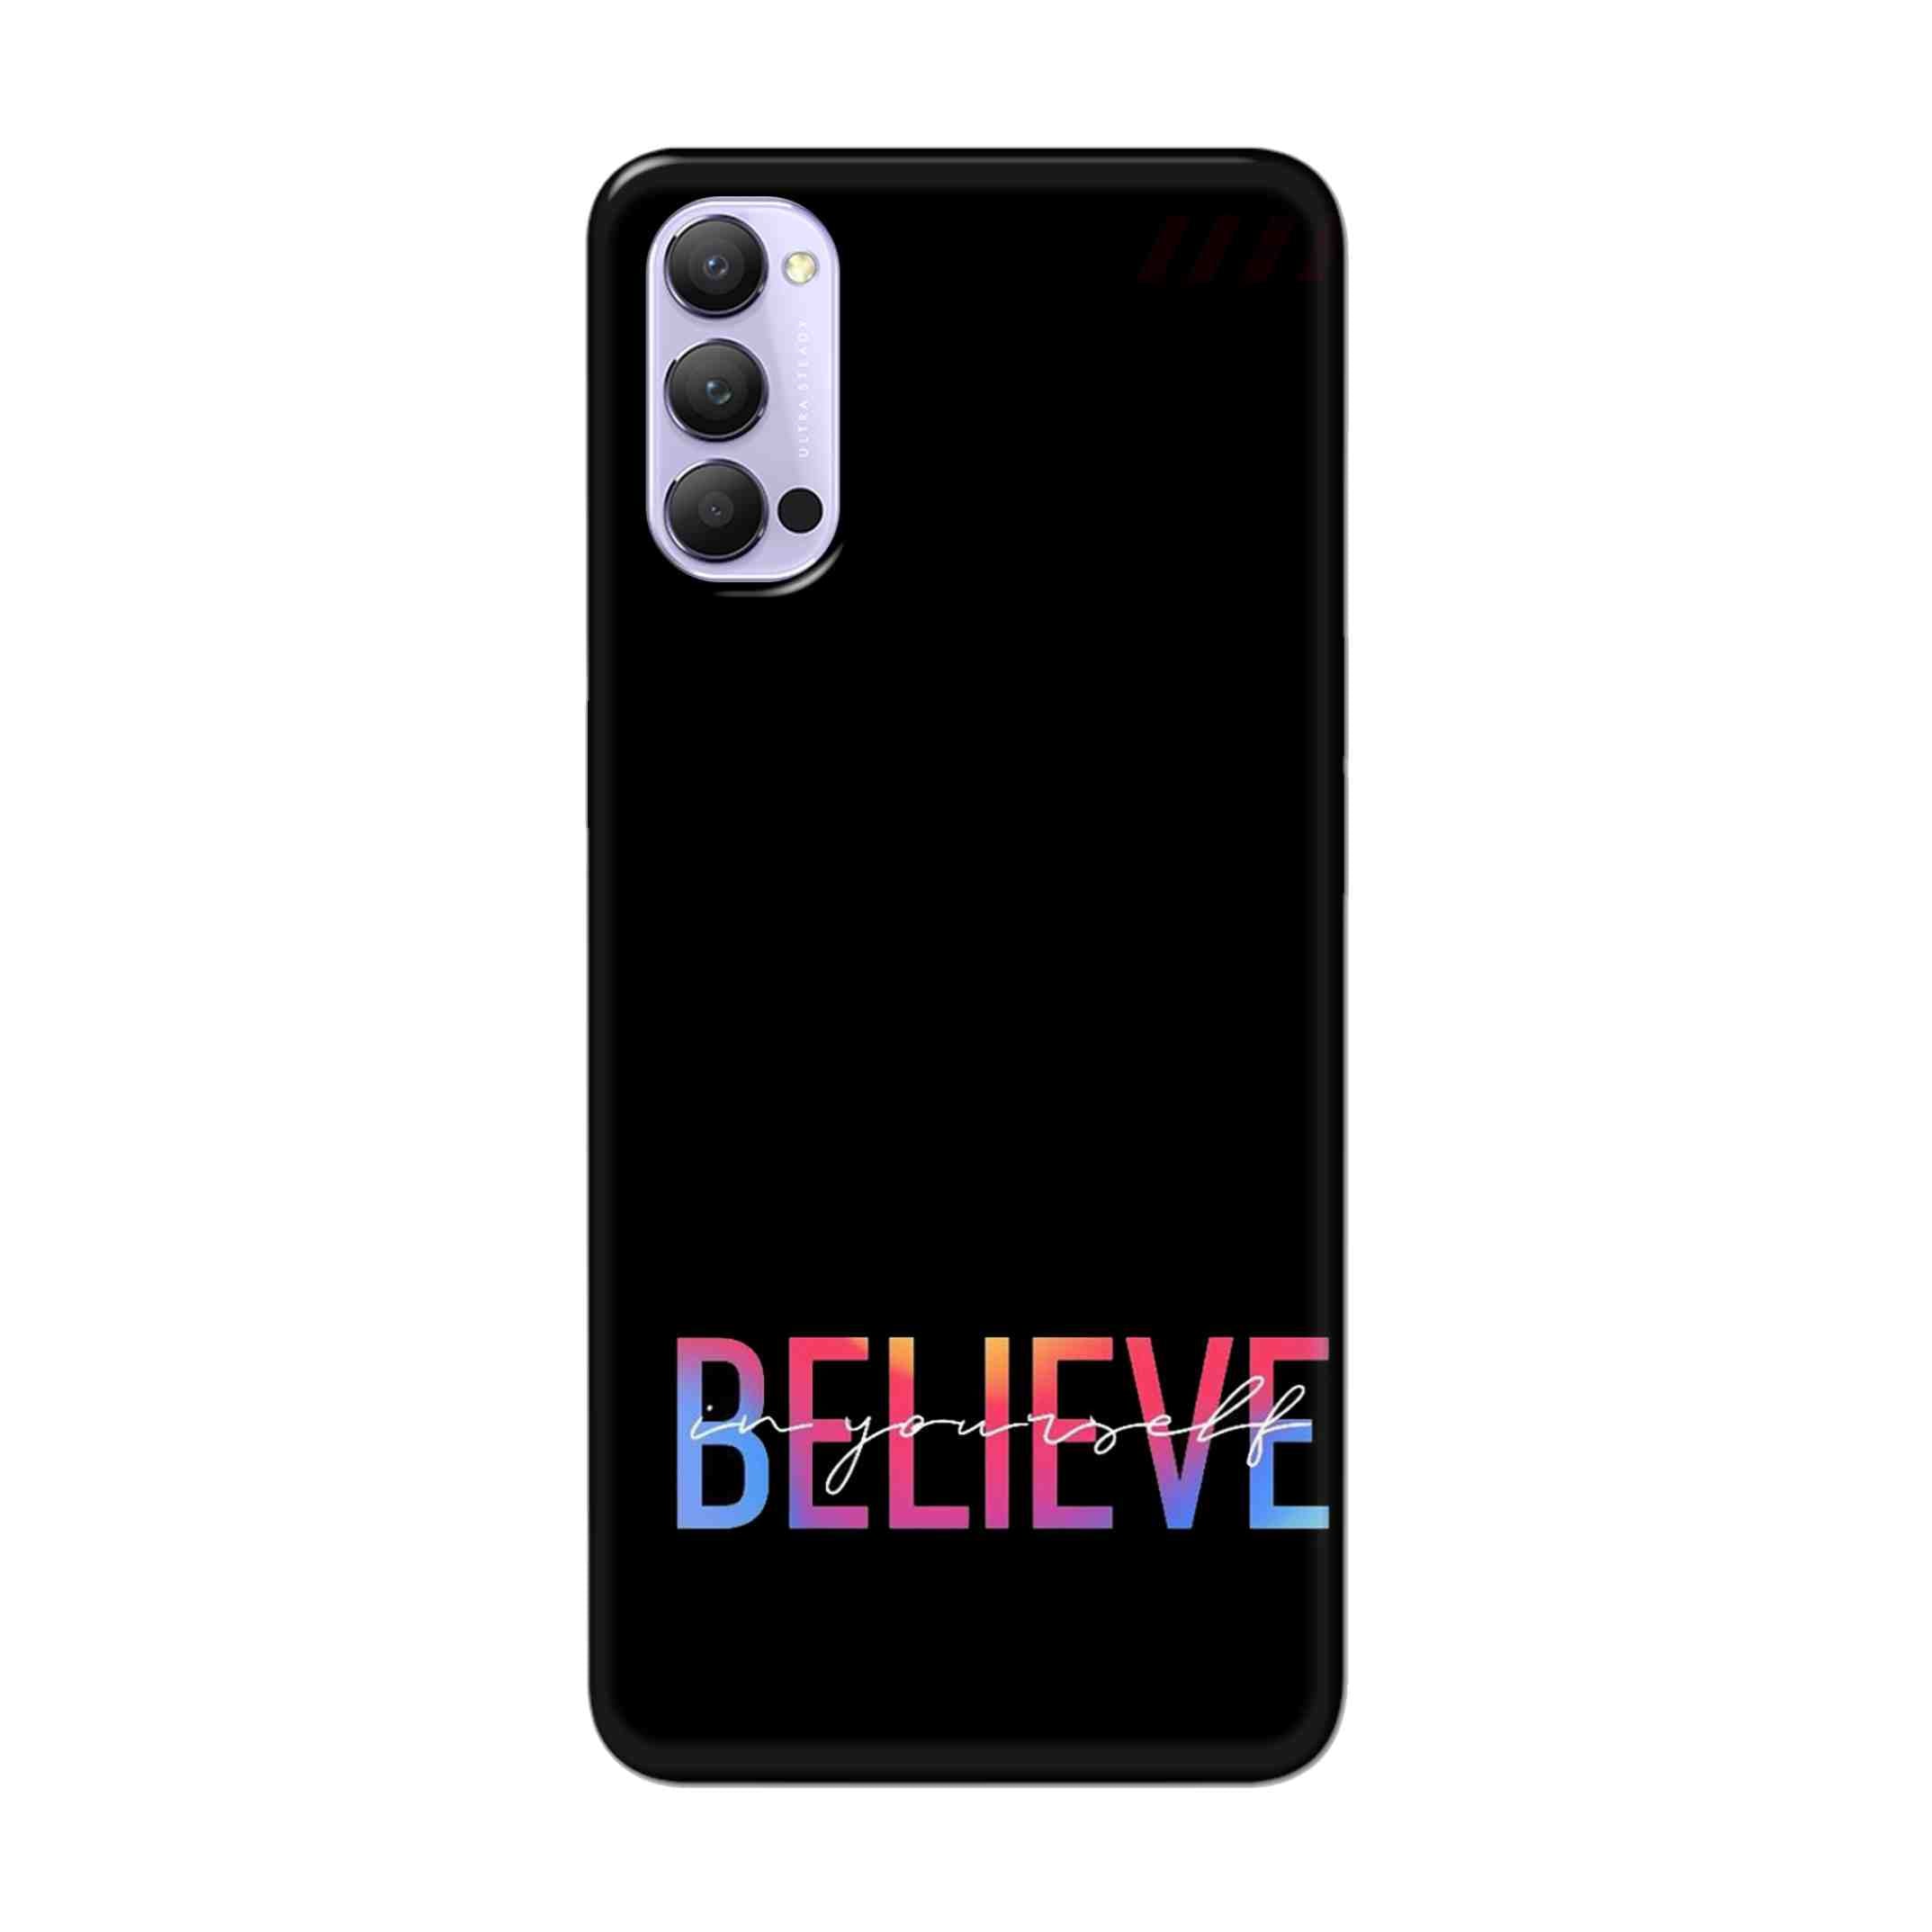 Buy Believe Hard Back Mobile Phone Case Cover For Oppo Reno 4 Pro Online